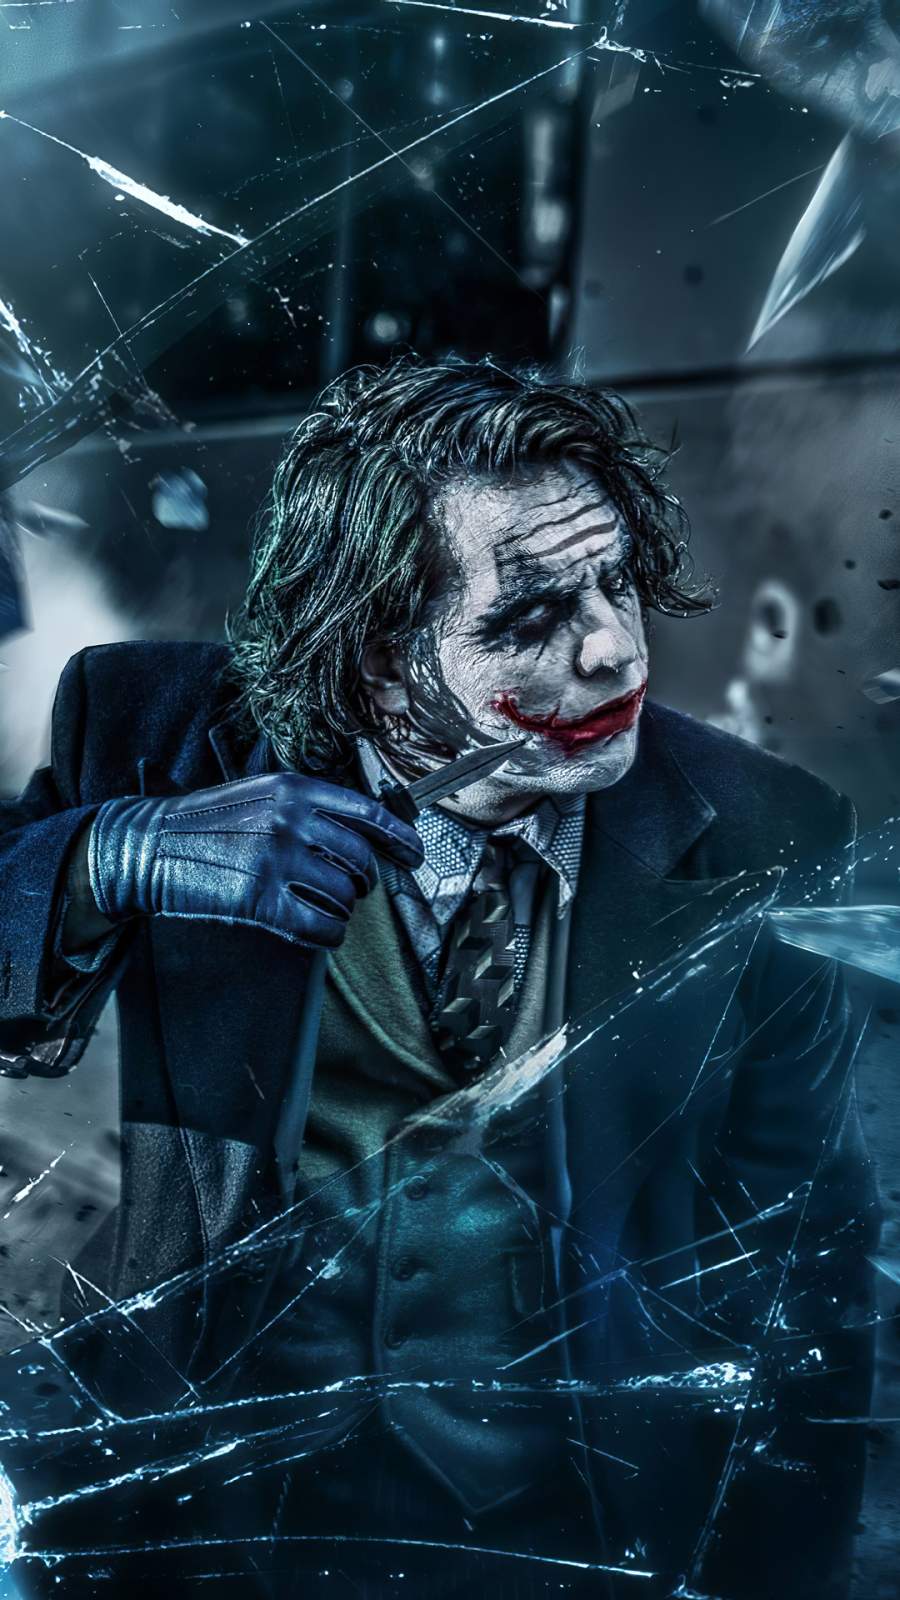 Joker With Knife IPhone Wallpaper - IPhone Wallpapers : iPhone Wallpapers